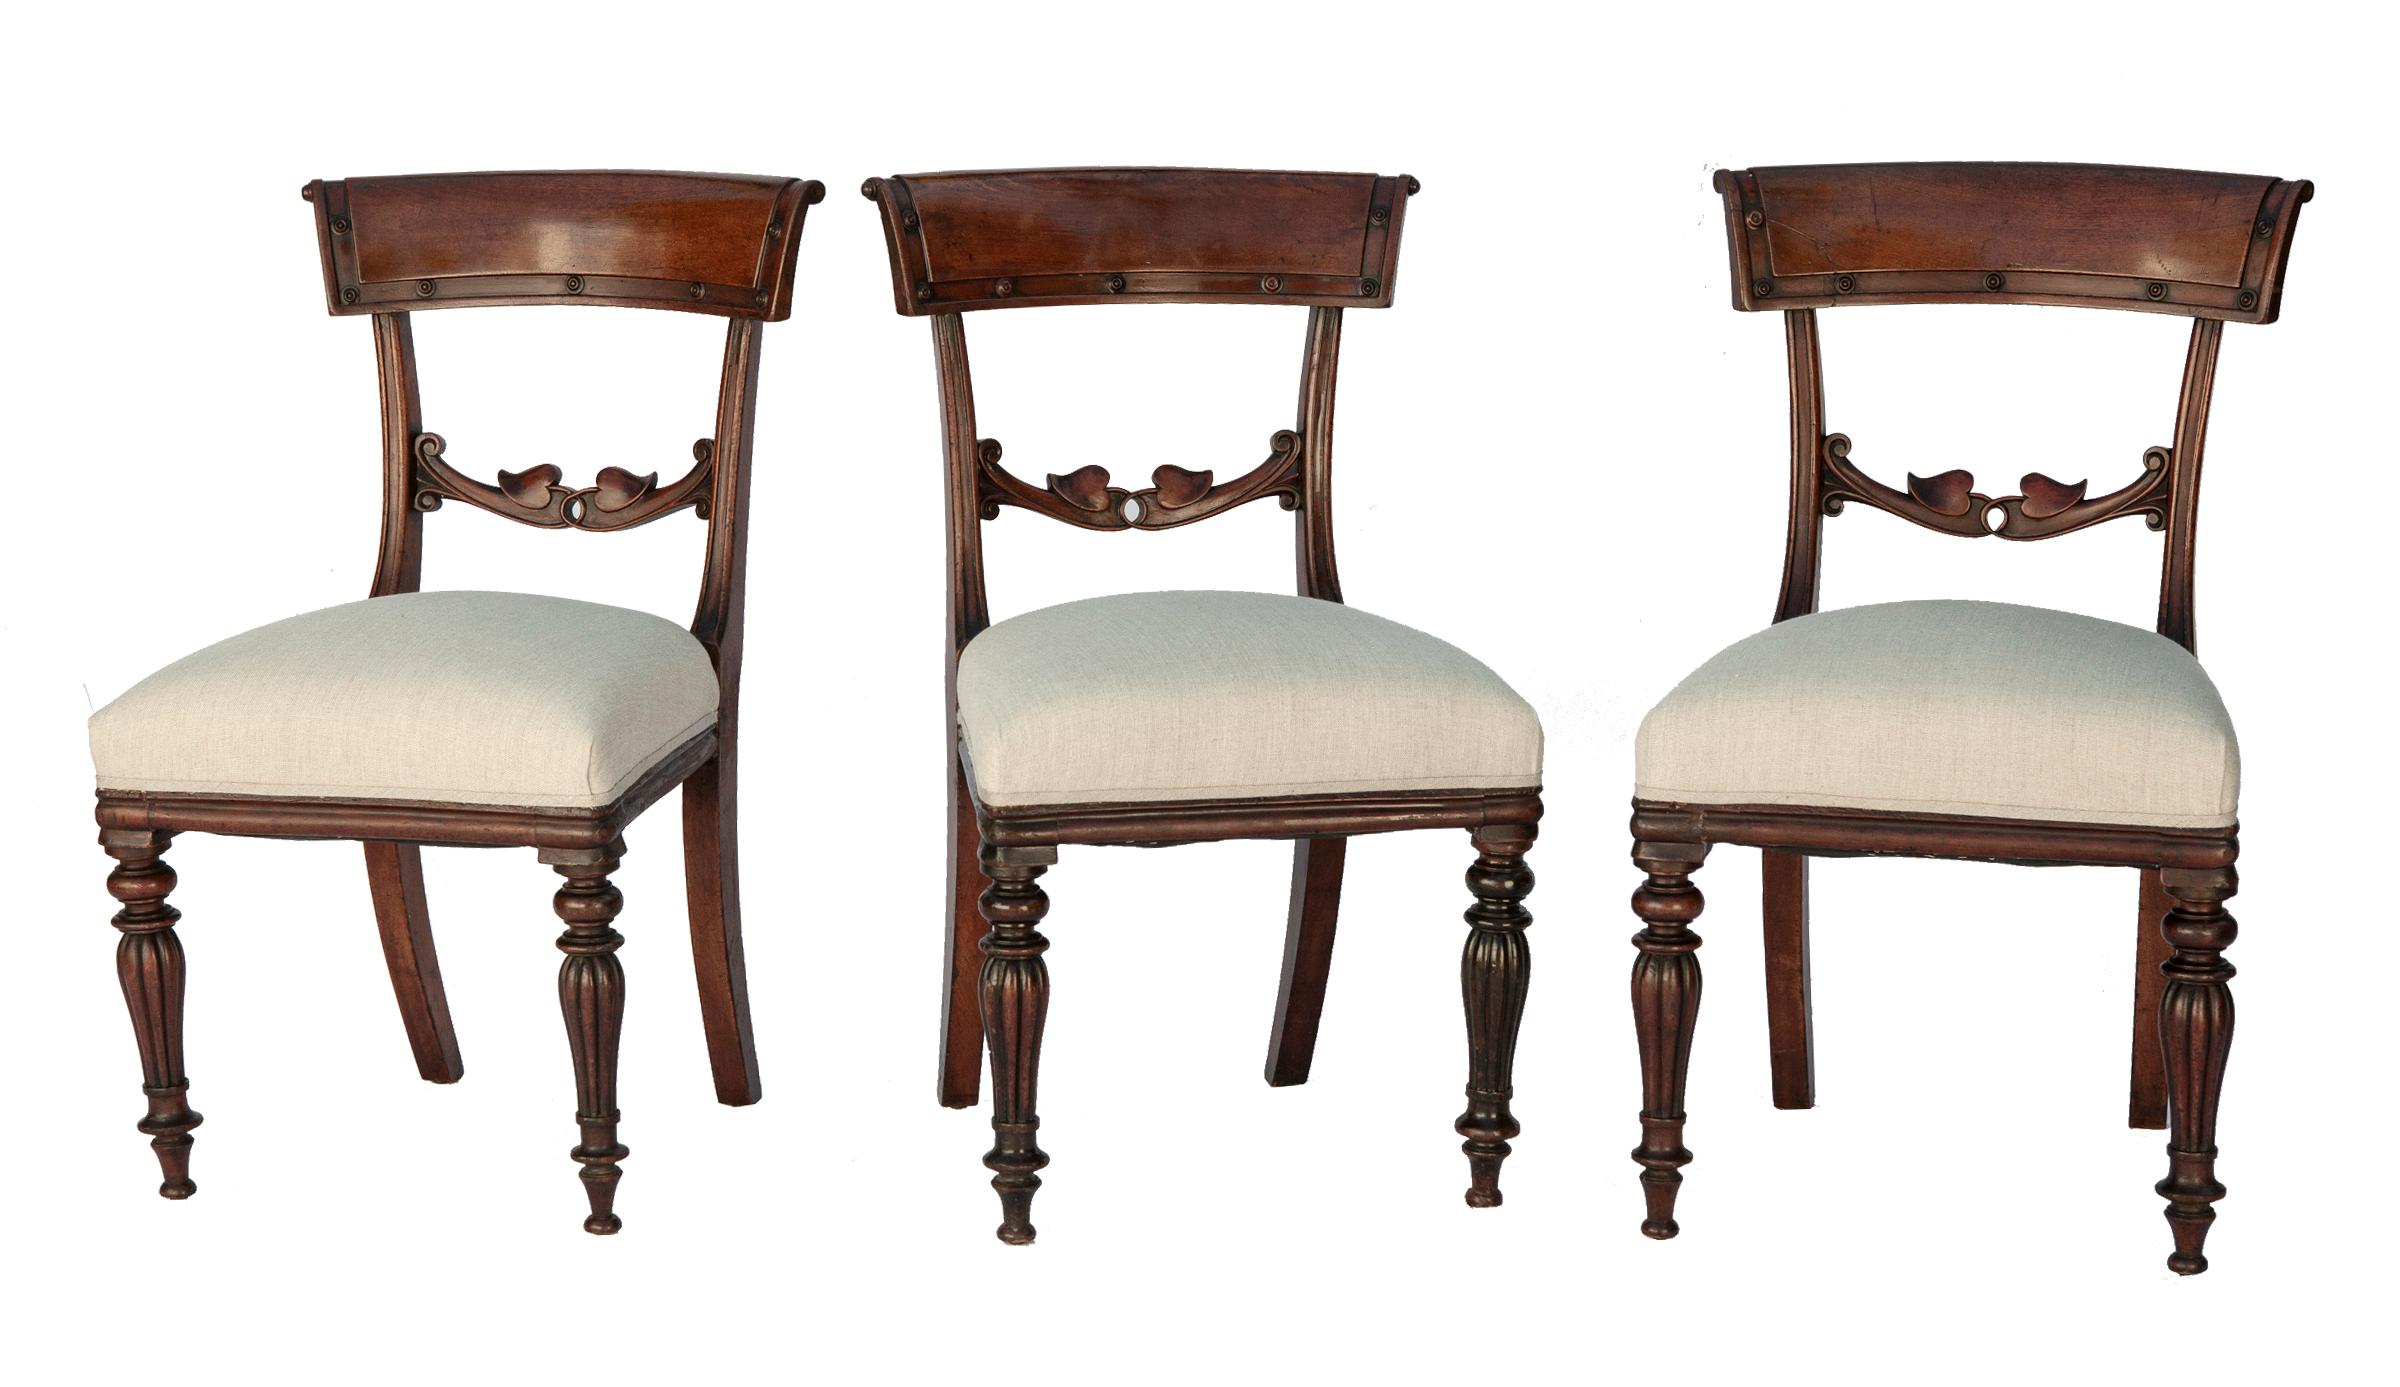 Neoclassical Empire Period Mahogany Dining Chairs For Sale 4